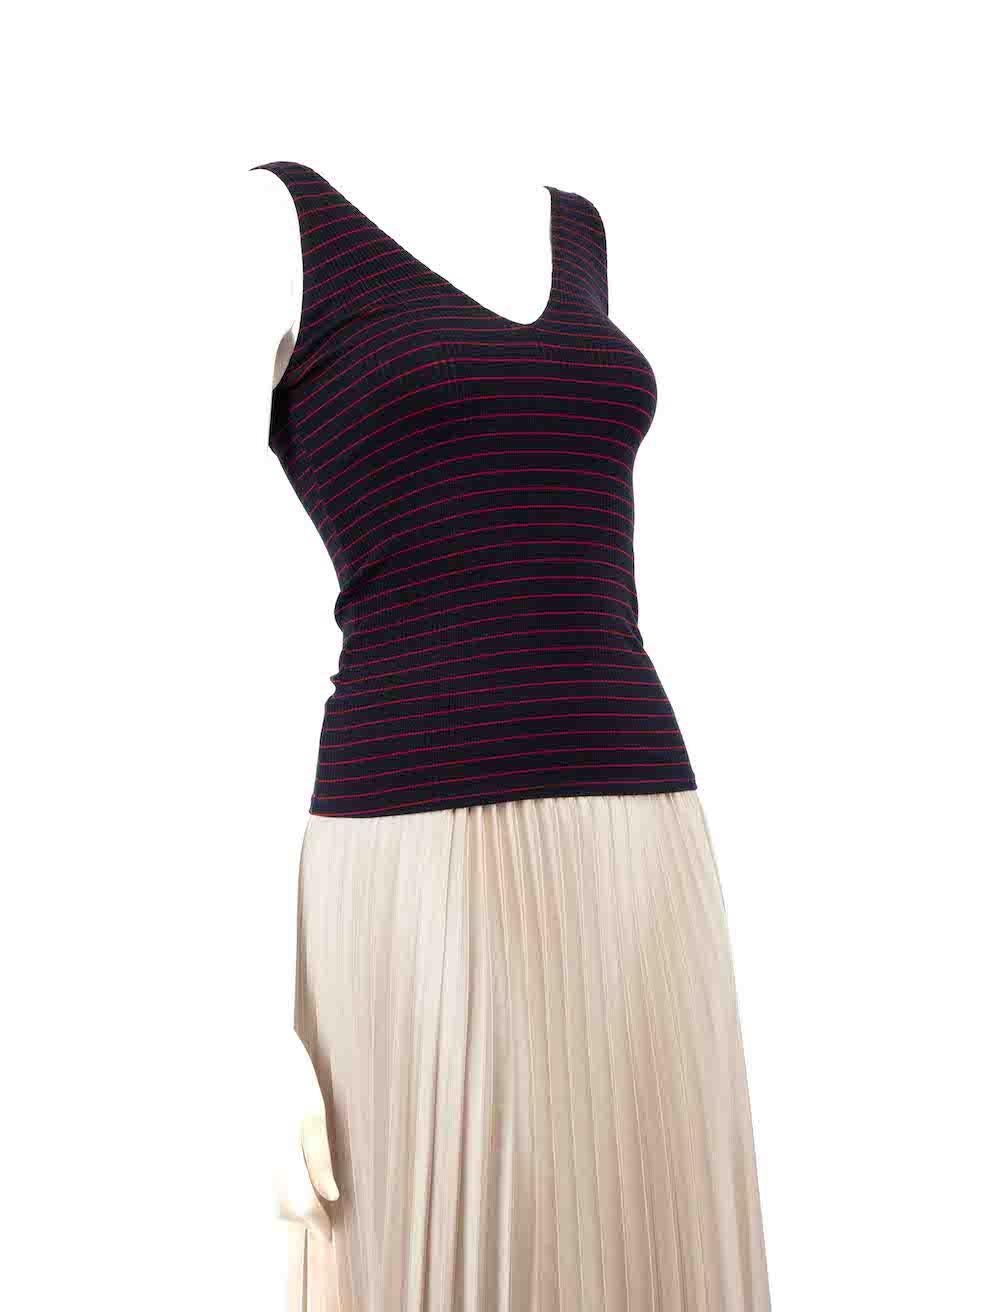 CONDITION is Very good. Hardly any visible wear to top is evident on this used Reformation designer resale item.
 
 
 
 Details
 
 
 Navy
 
 Synthetic
 
 Sleeveless top
 
 Striped pattern
 
 Rib knitted and stretchy
 
 V neckline
 
 
 
 
 
 Made in